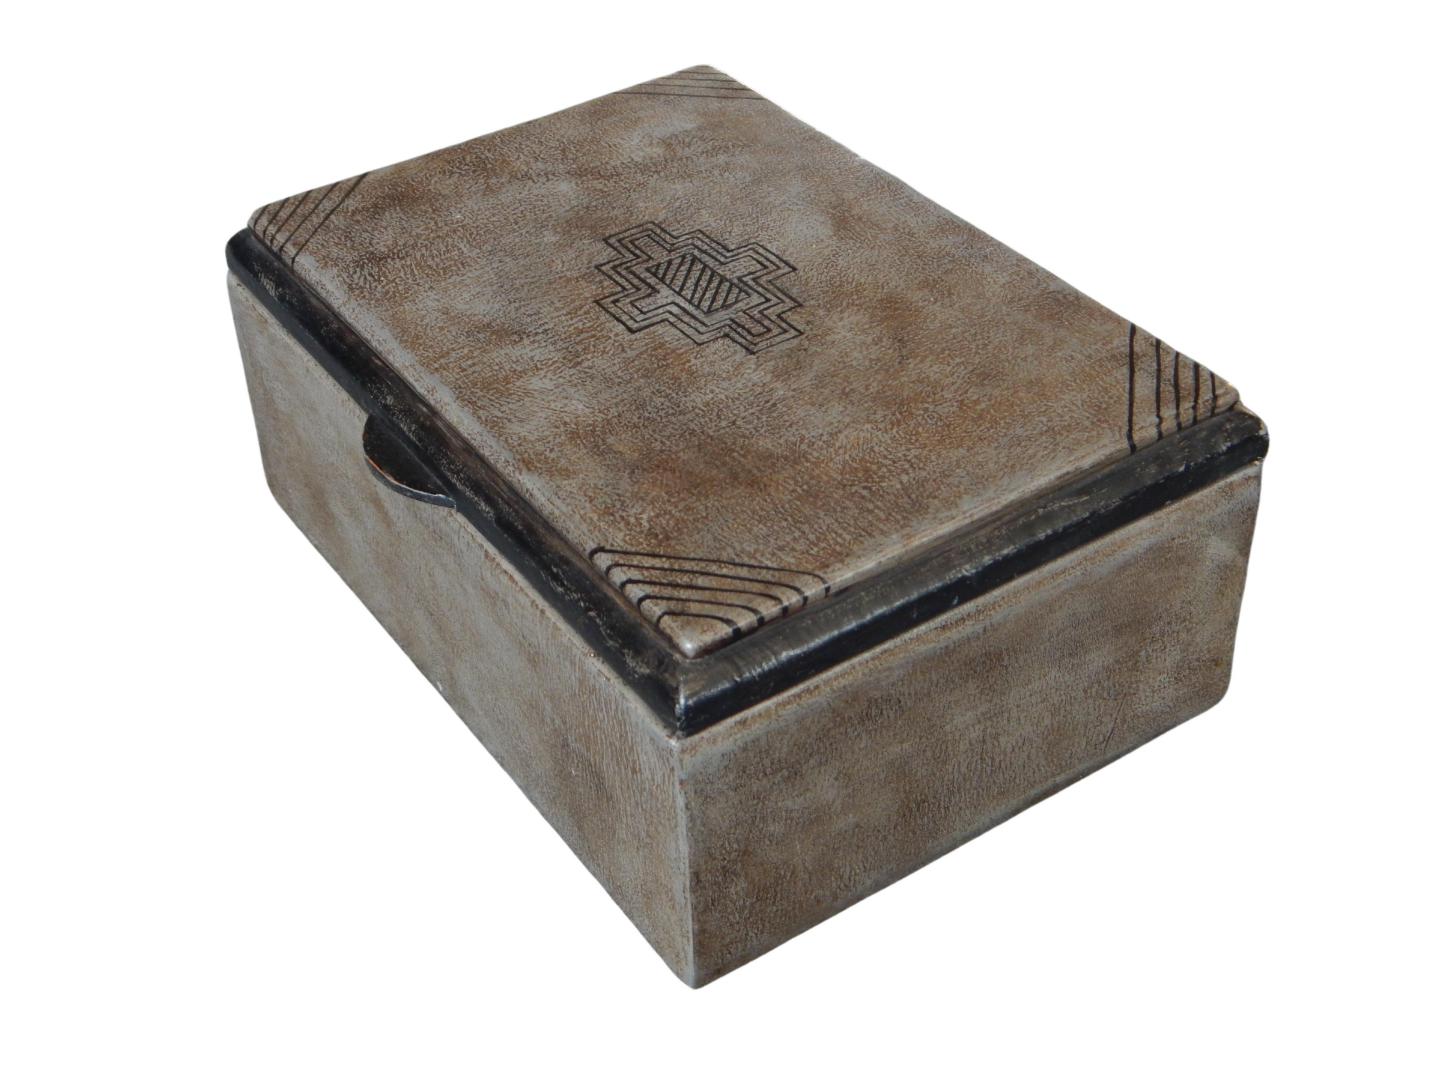 leather box with a tribal shipibo desing on top of the box